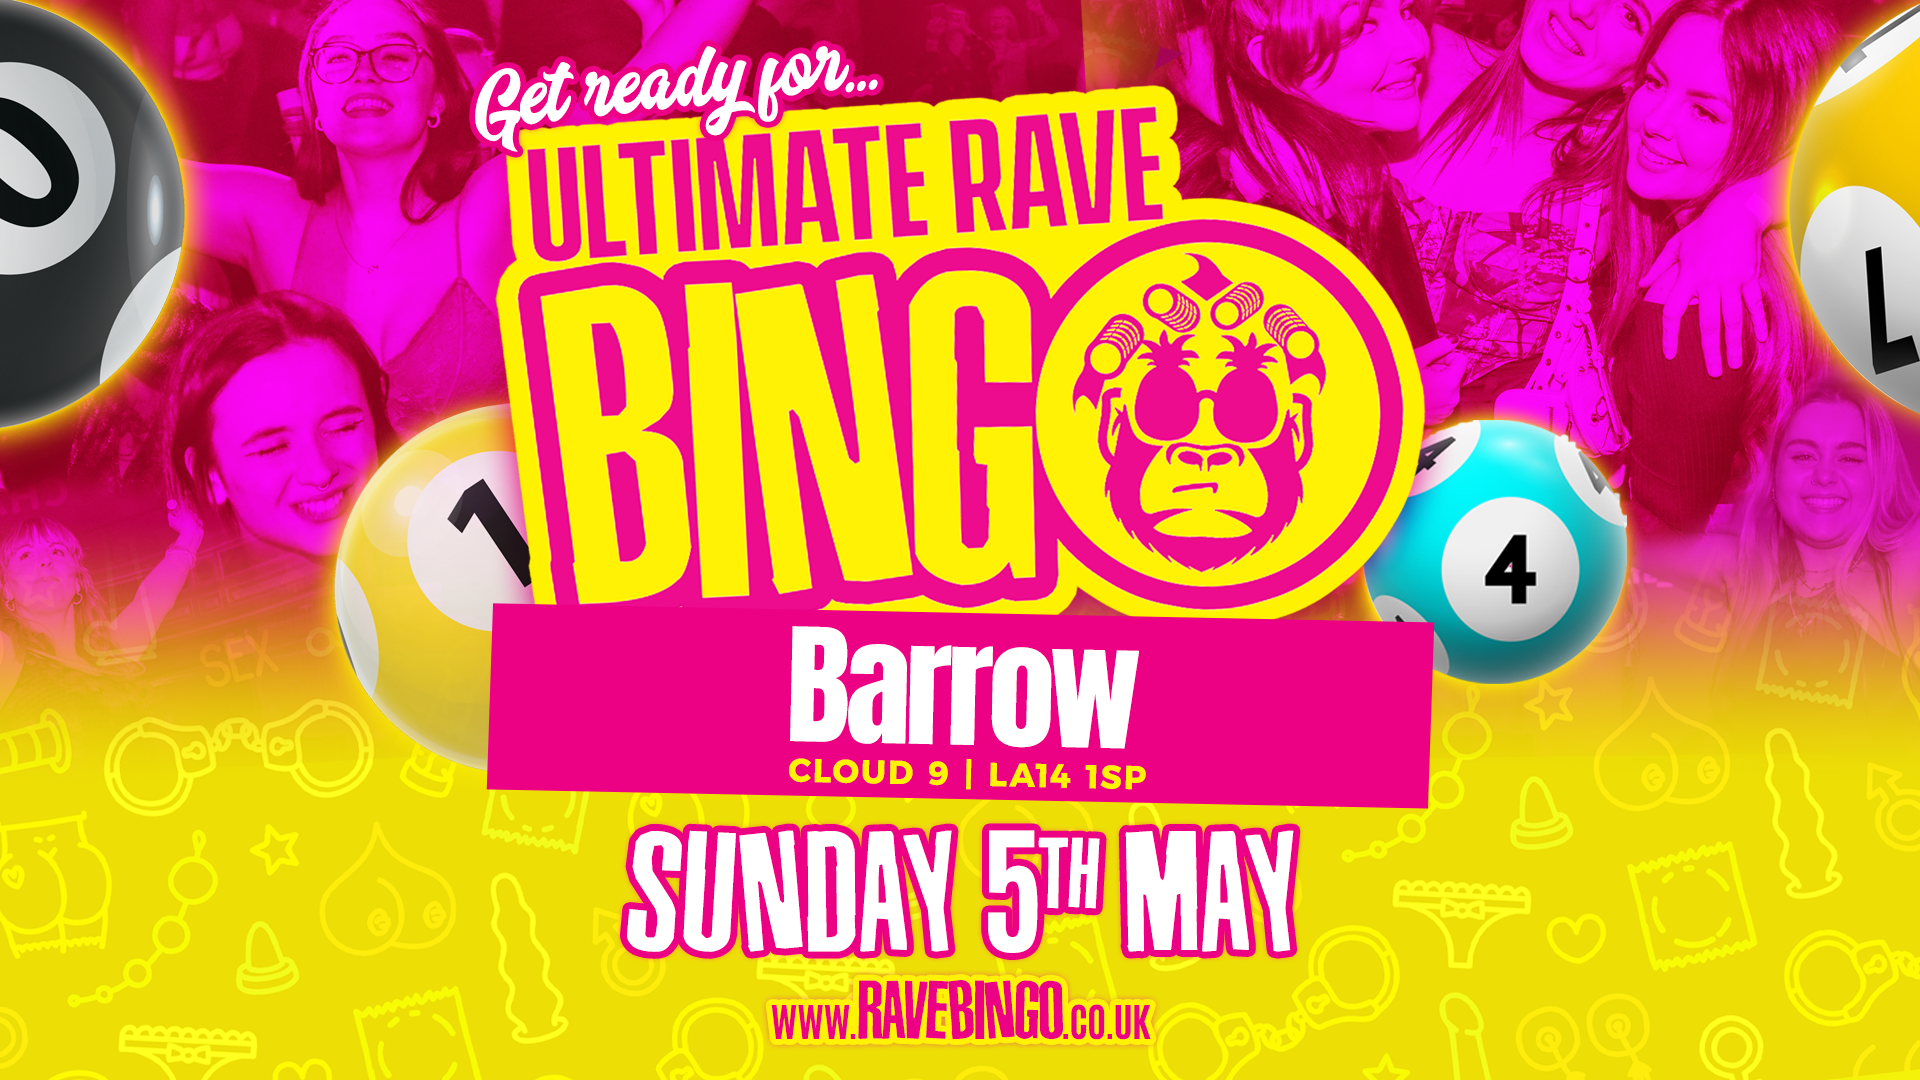 Ultimate Rave Bingo // Barrow // Super Sunday Special // 5th May